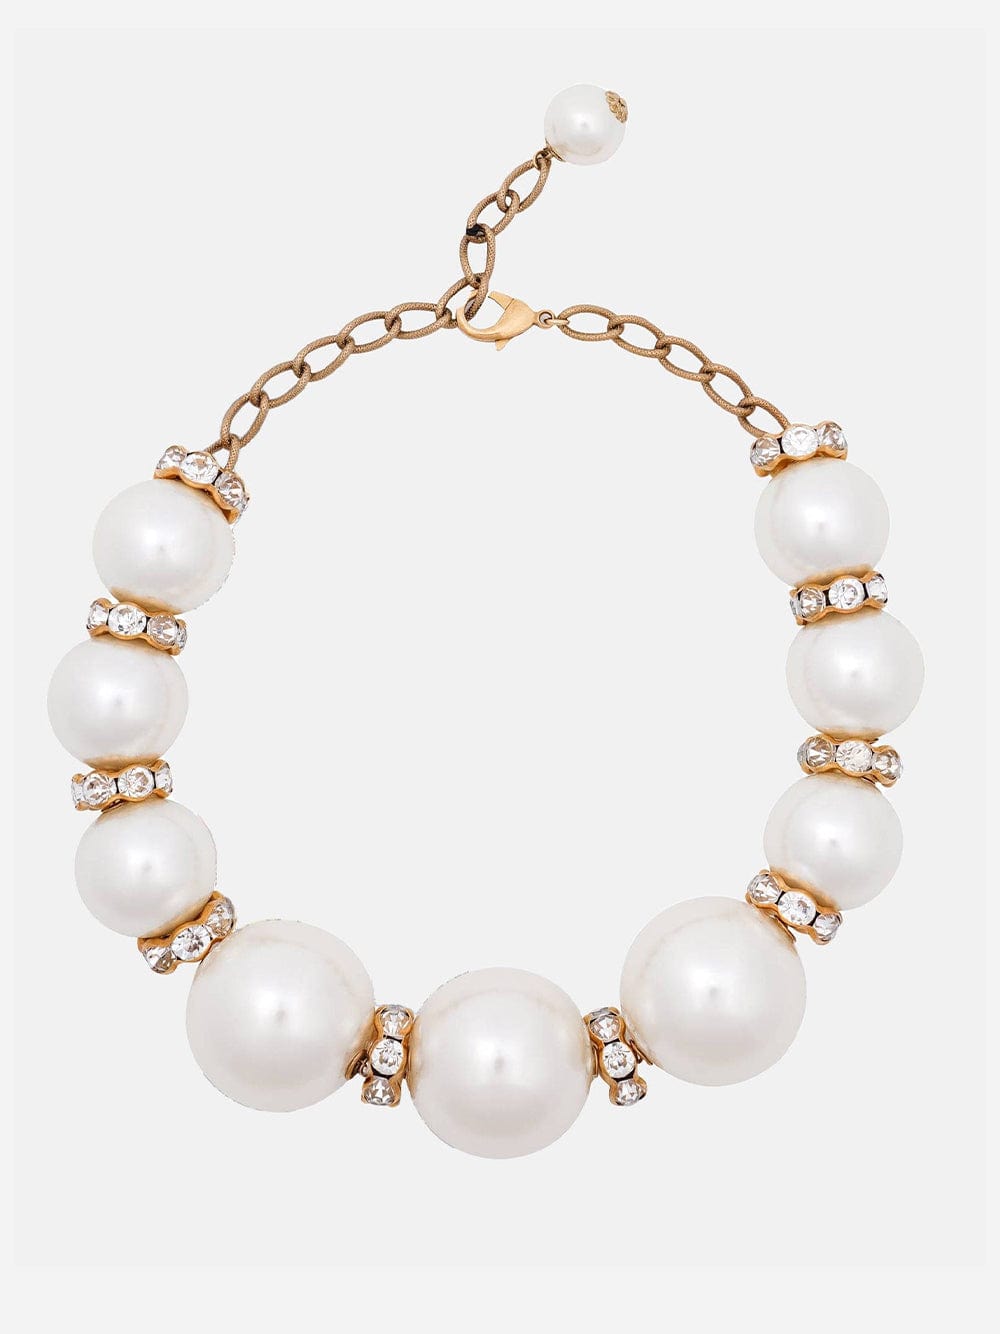 Dolce & Gabbana Faux Pearl Beads Necklace